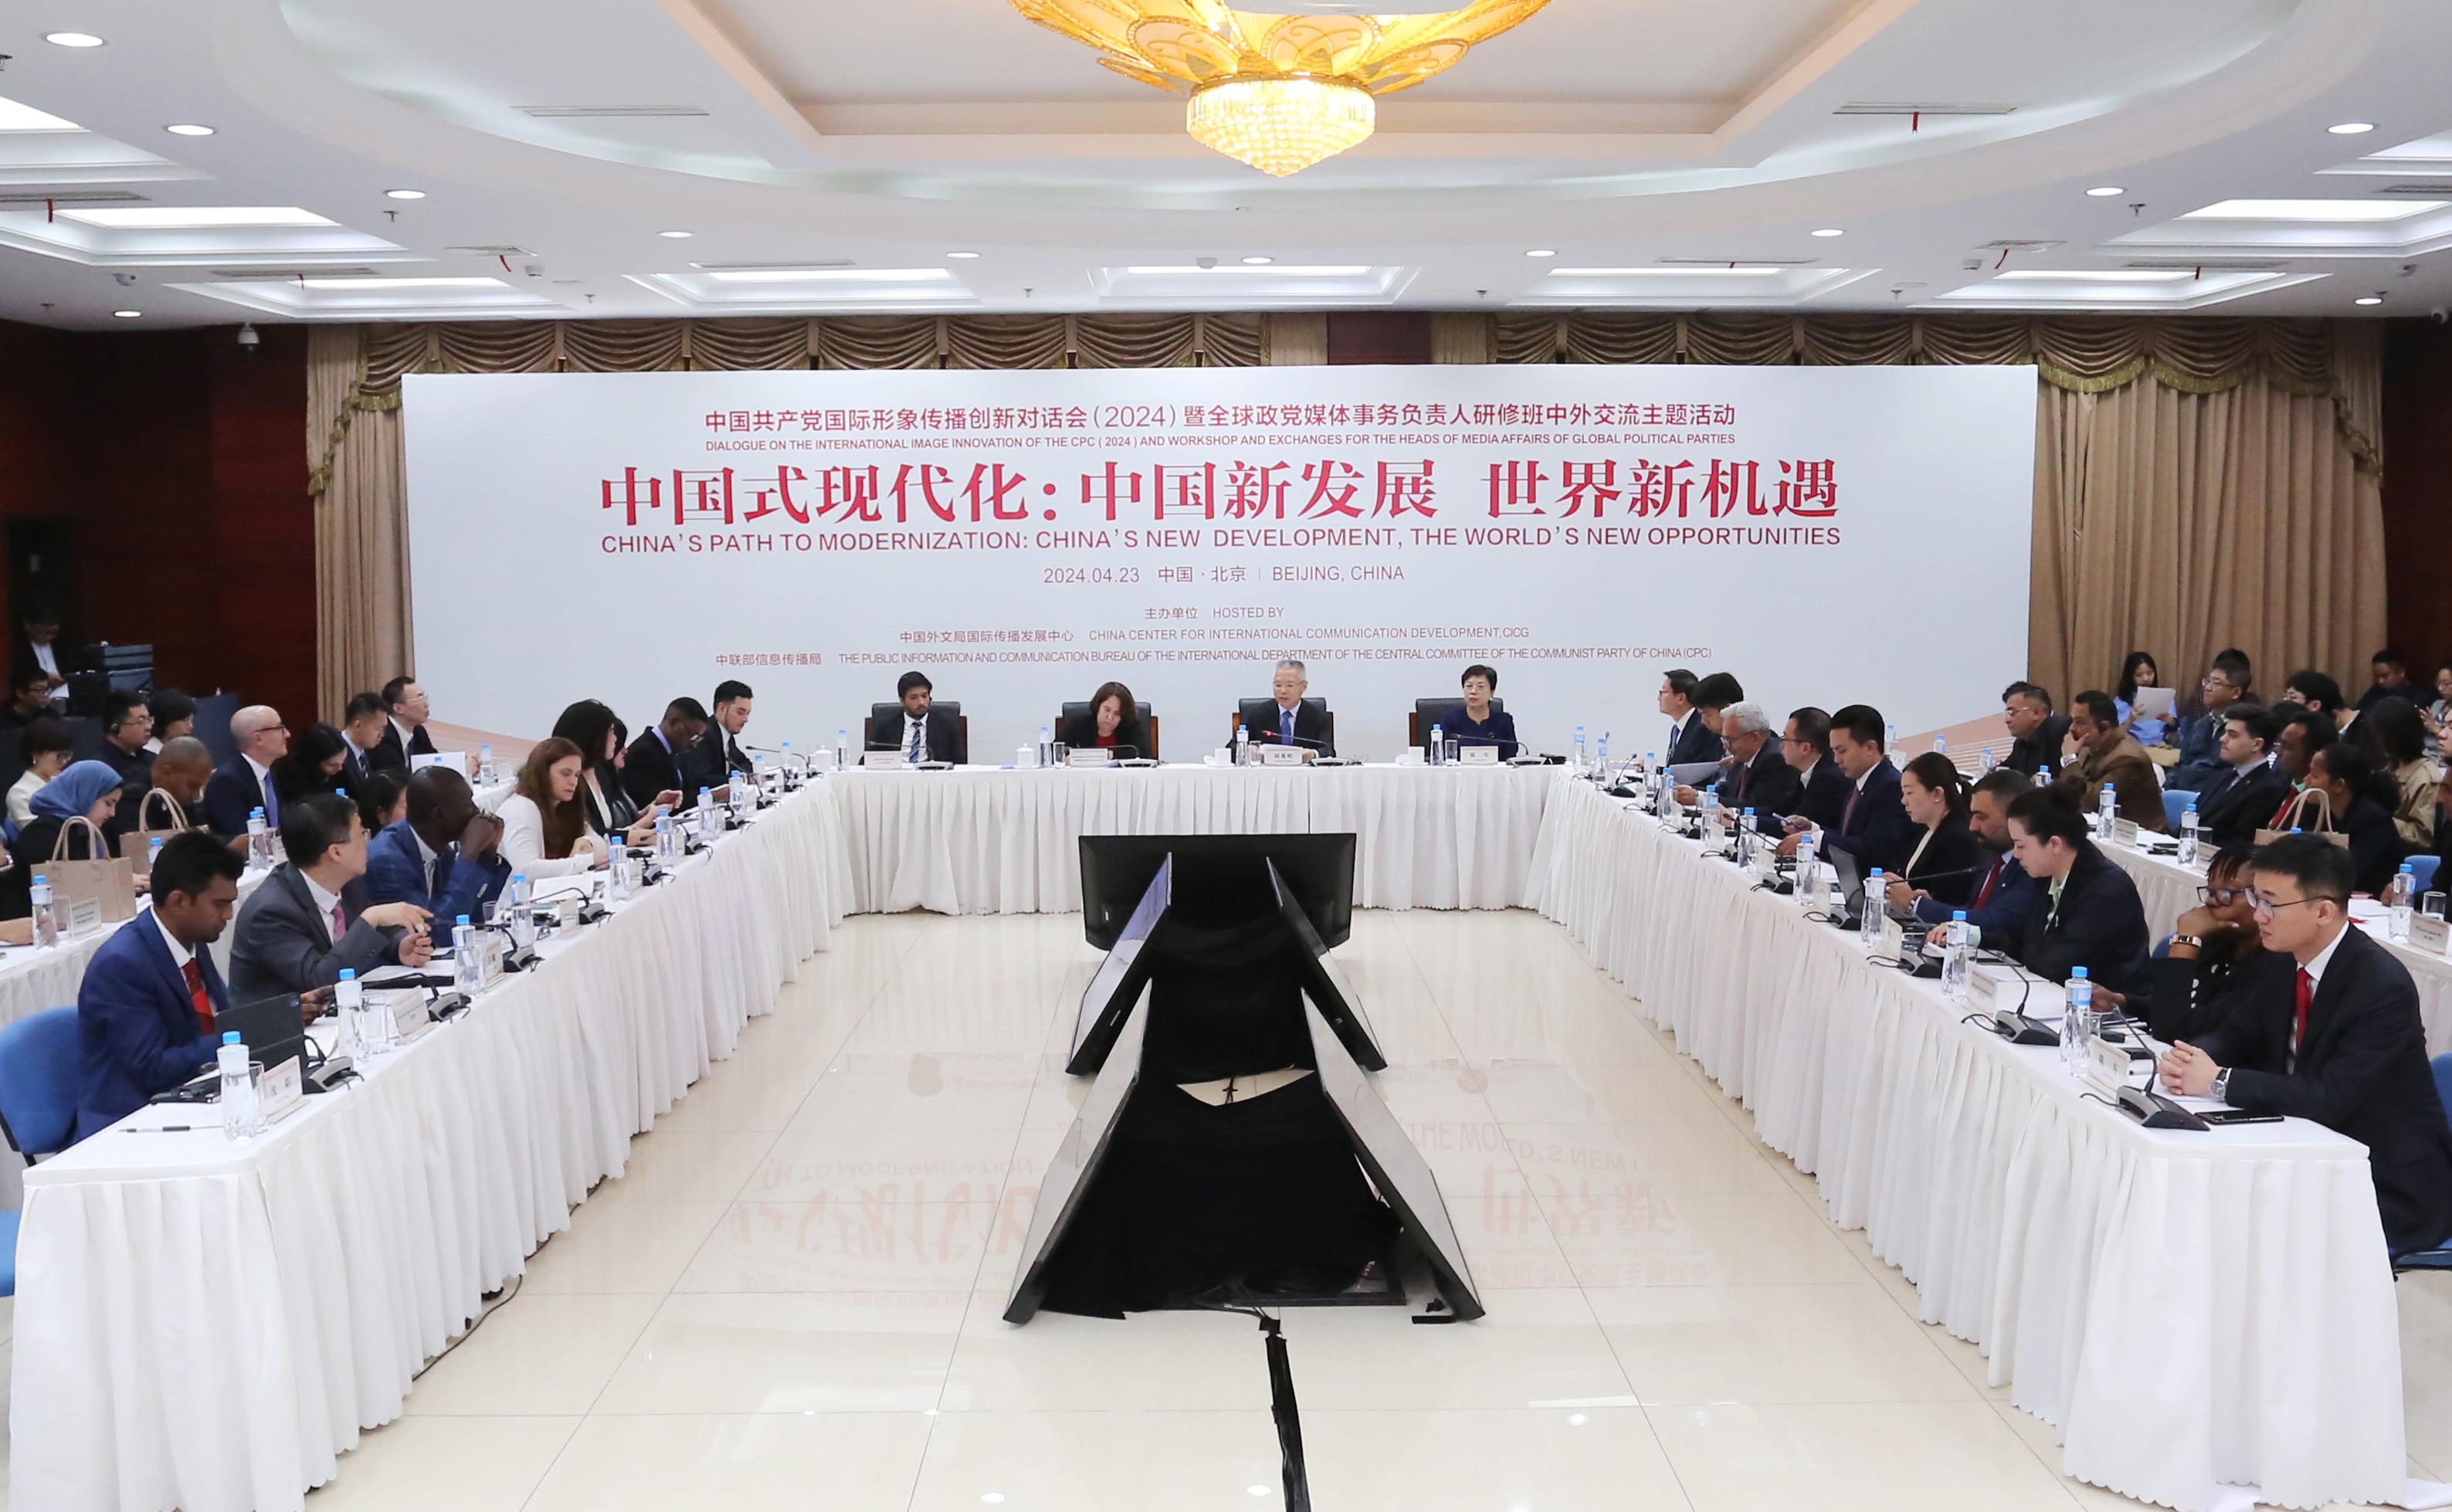 Global political party media officials discuss China's modernization